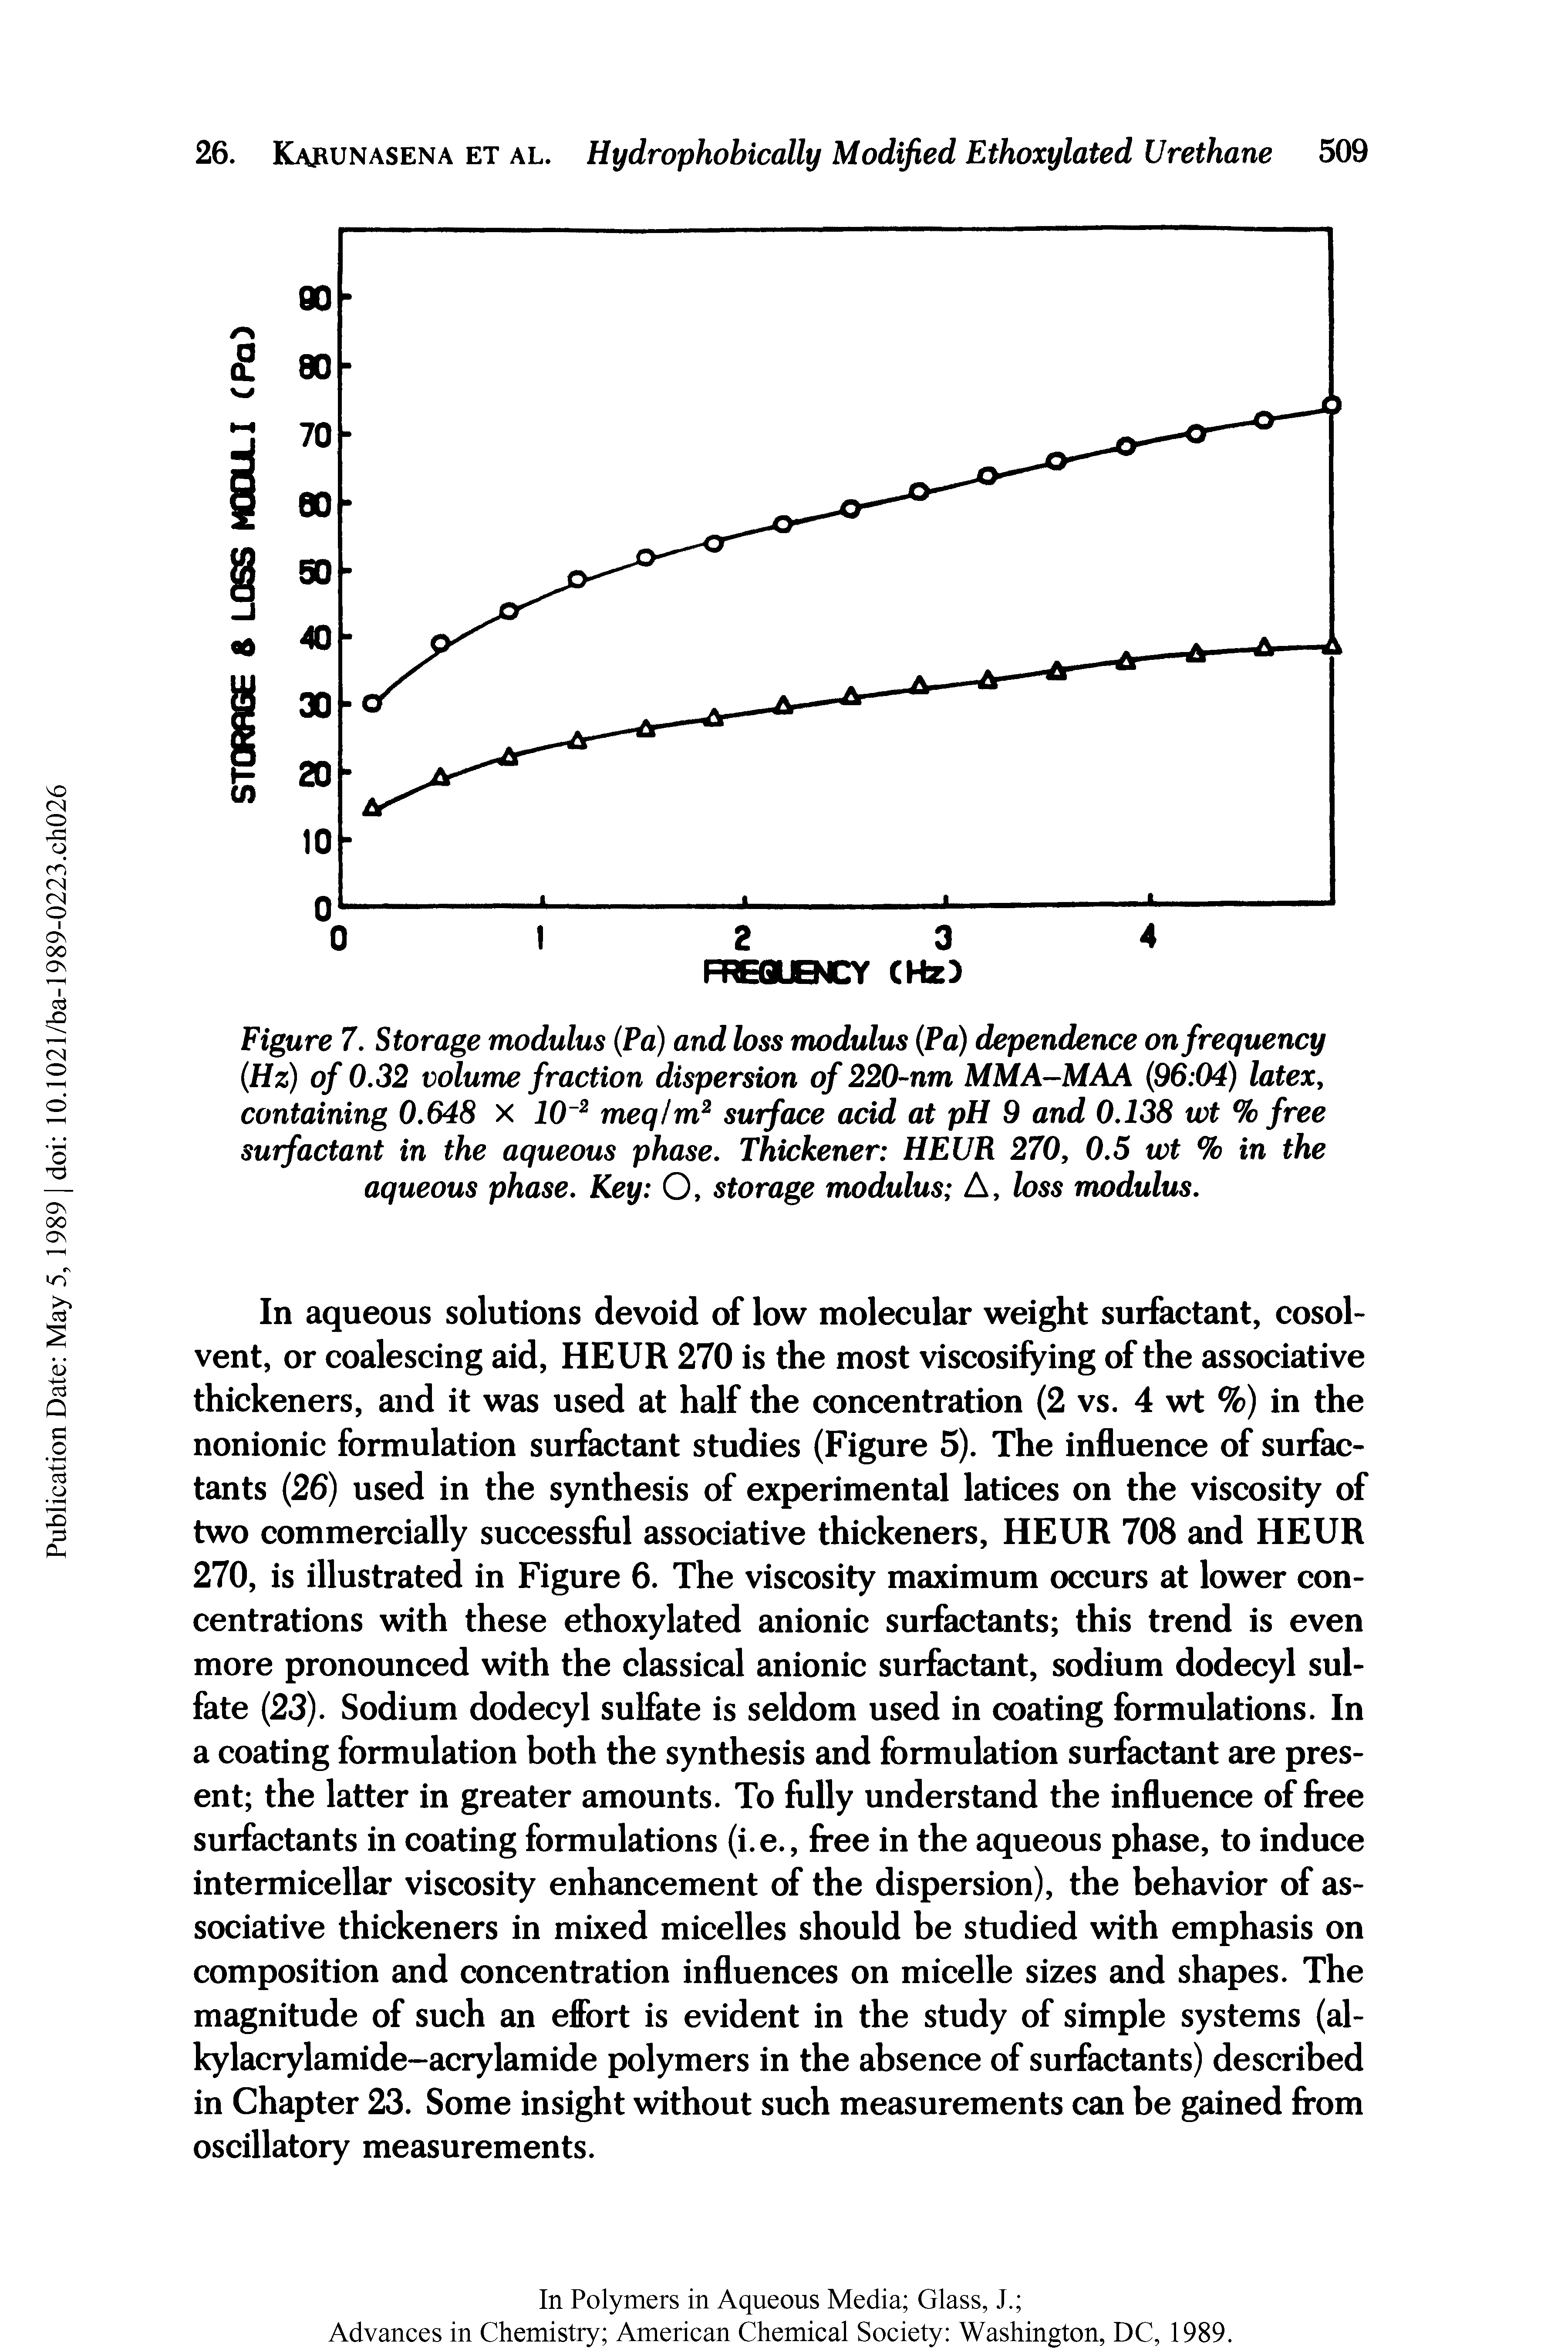 Figure 7. Storage modulus (Pa) and loss modulus (Pa) dependence on frequency (Hz) of 0.32 volume fraction dispersion of 220-nm MMA-MAA (96 04) latex, containing 0.648 X 10 meq/m surface acid at pH 9 and 0.138 wt % free surfactant in the aqueous phase. Thickener HEUR 270, 0.5 wt % in the aqueous phase. Key O, storage modulus A, loss modulus.